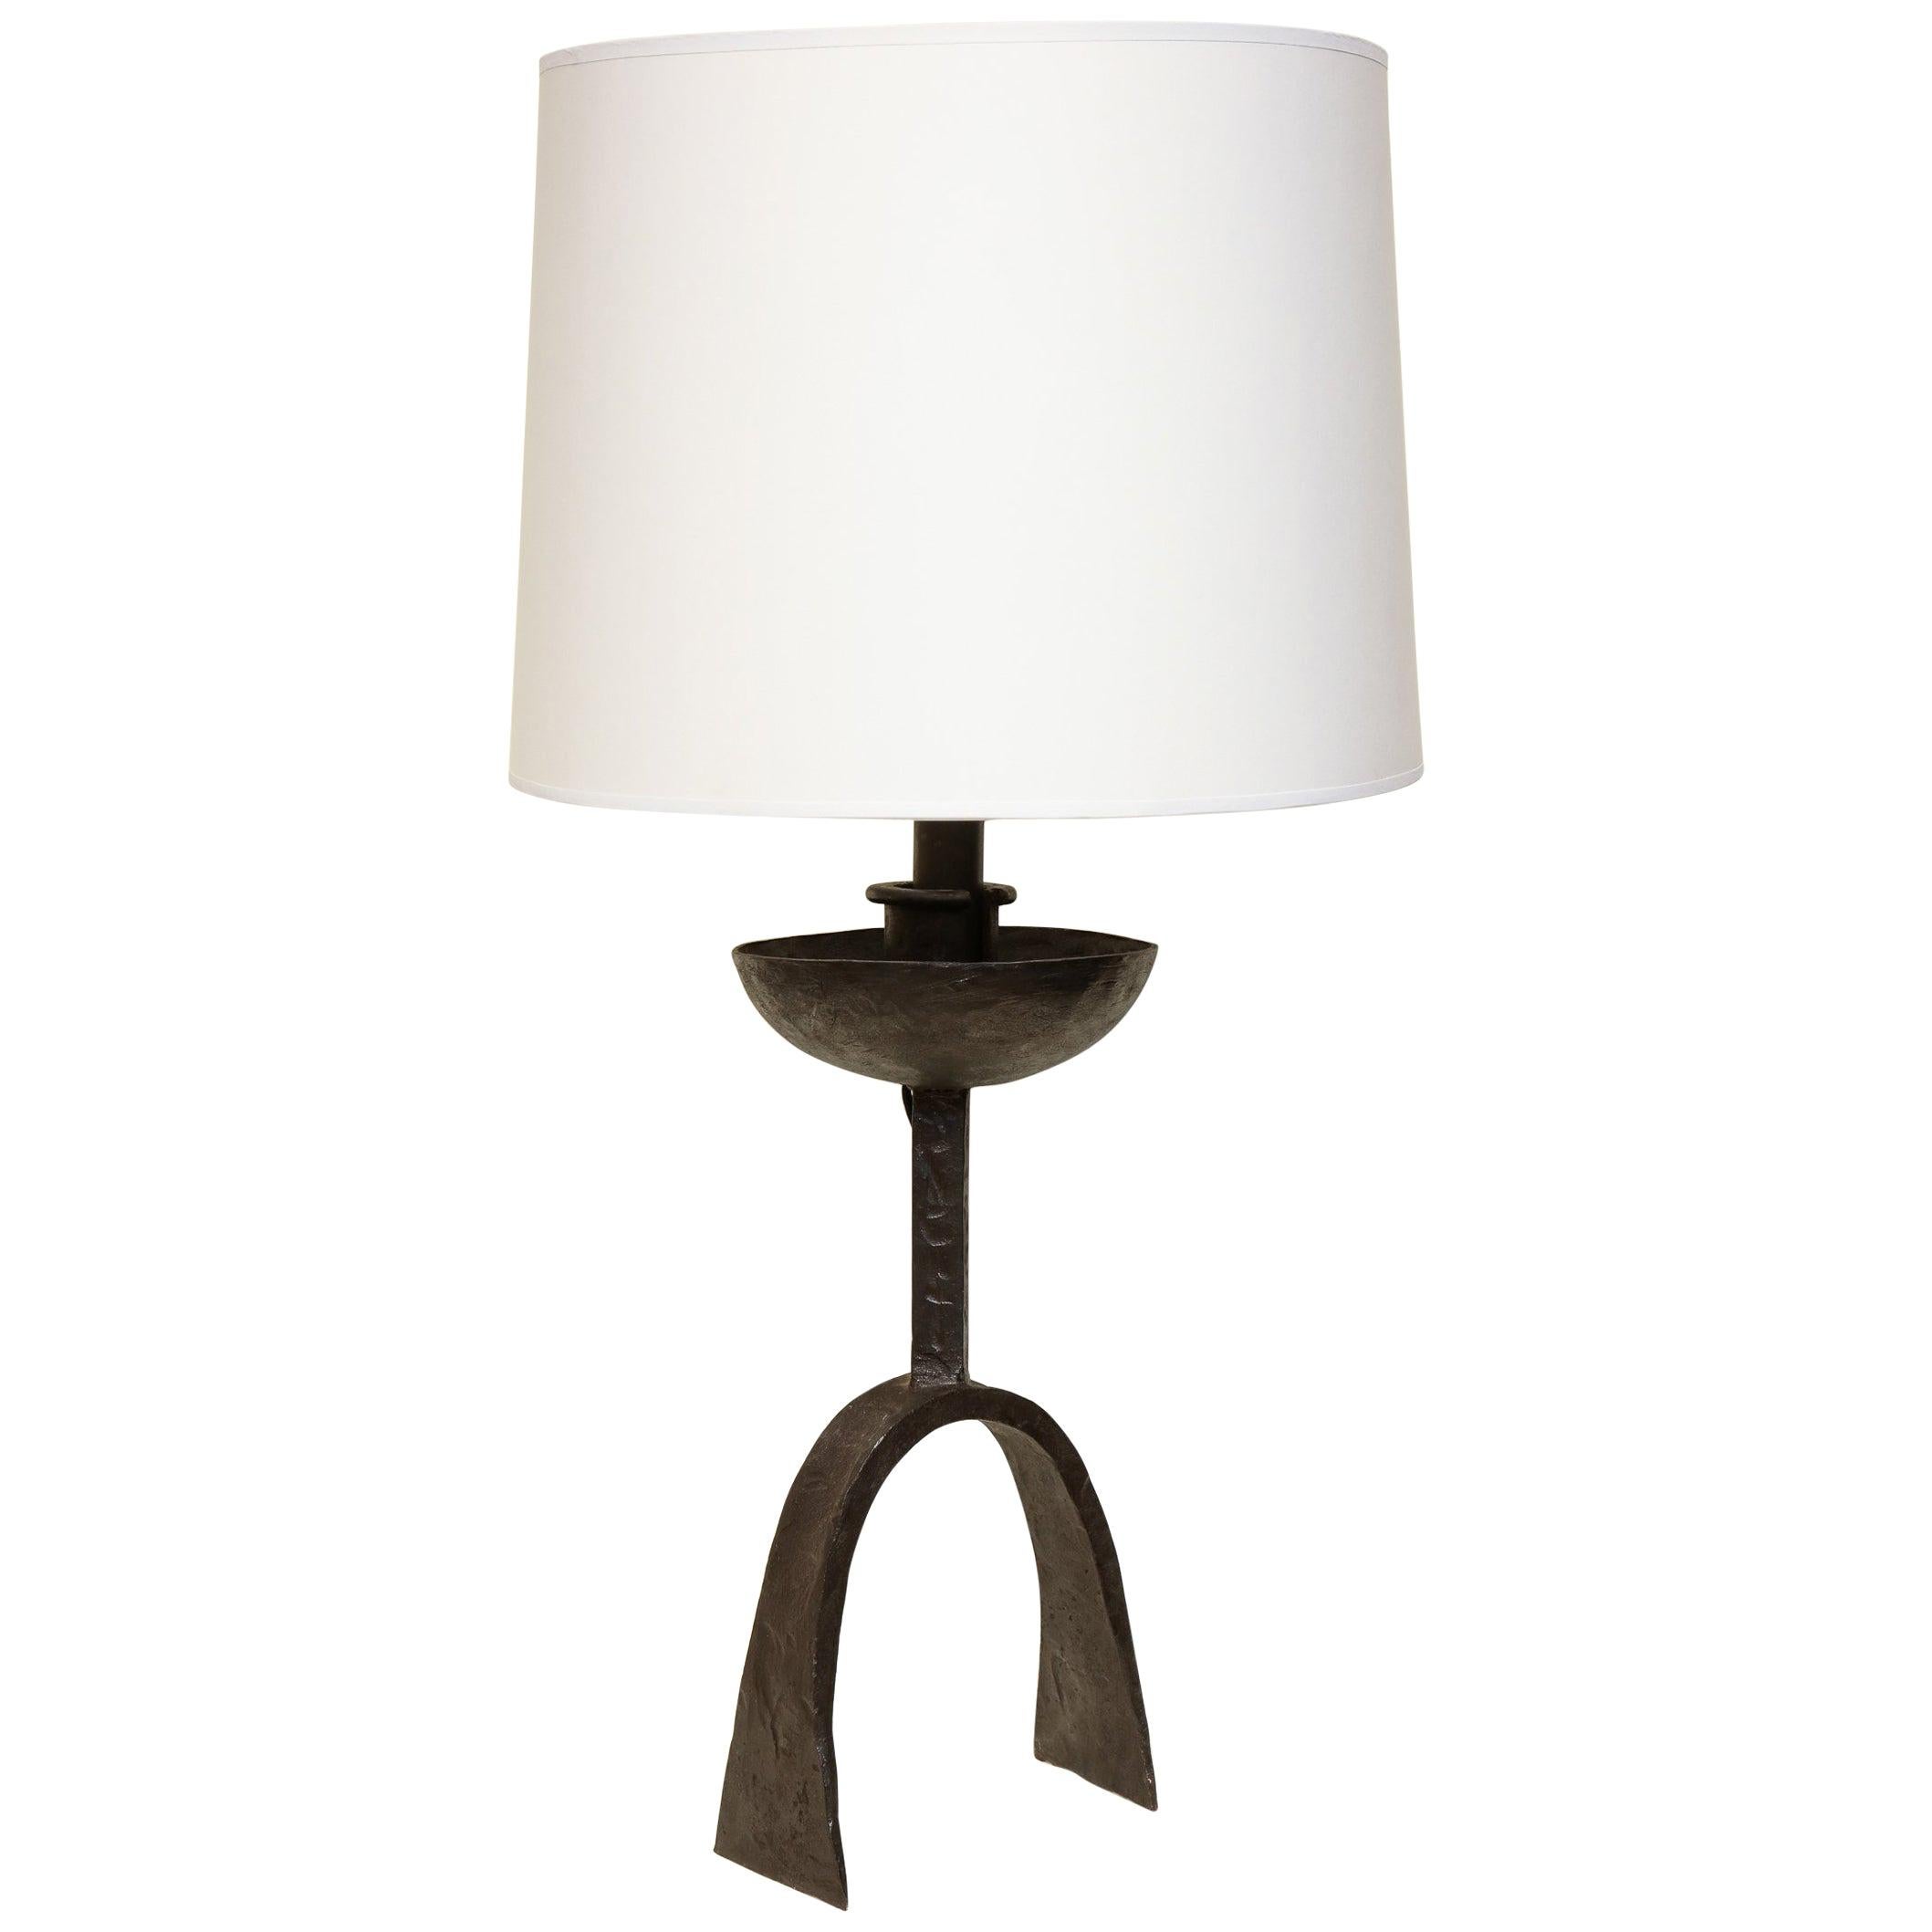 Brutalist Table Lamp Handwrought Iron Mid-Century Modern, Italy, 1960s For Sale